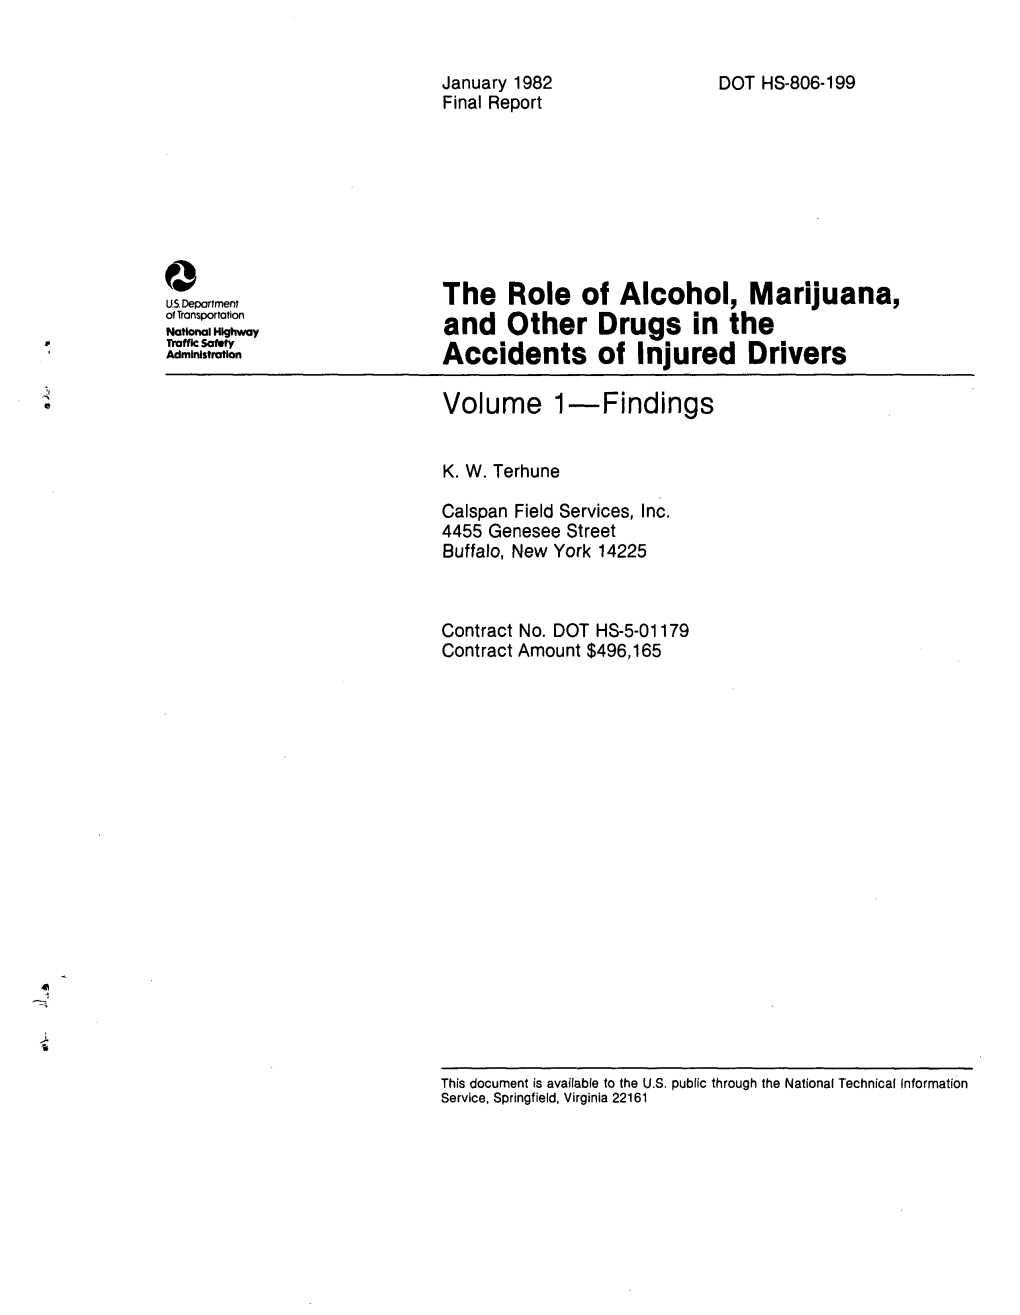 The Role of Alcohol, Marijuana, and Other Drugs in the Accidents Of